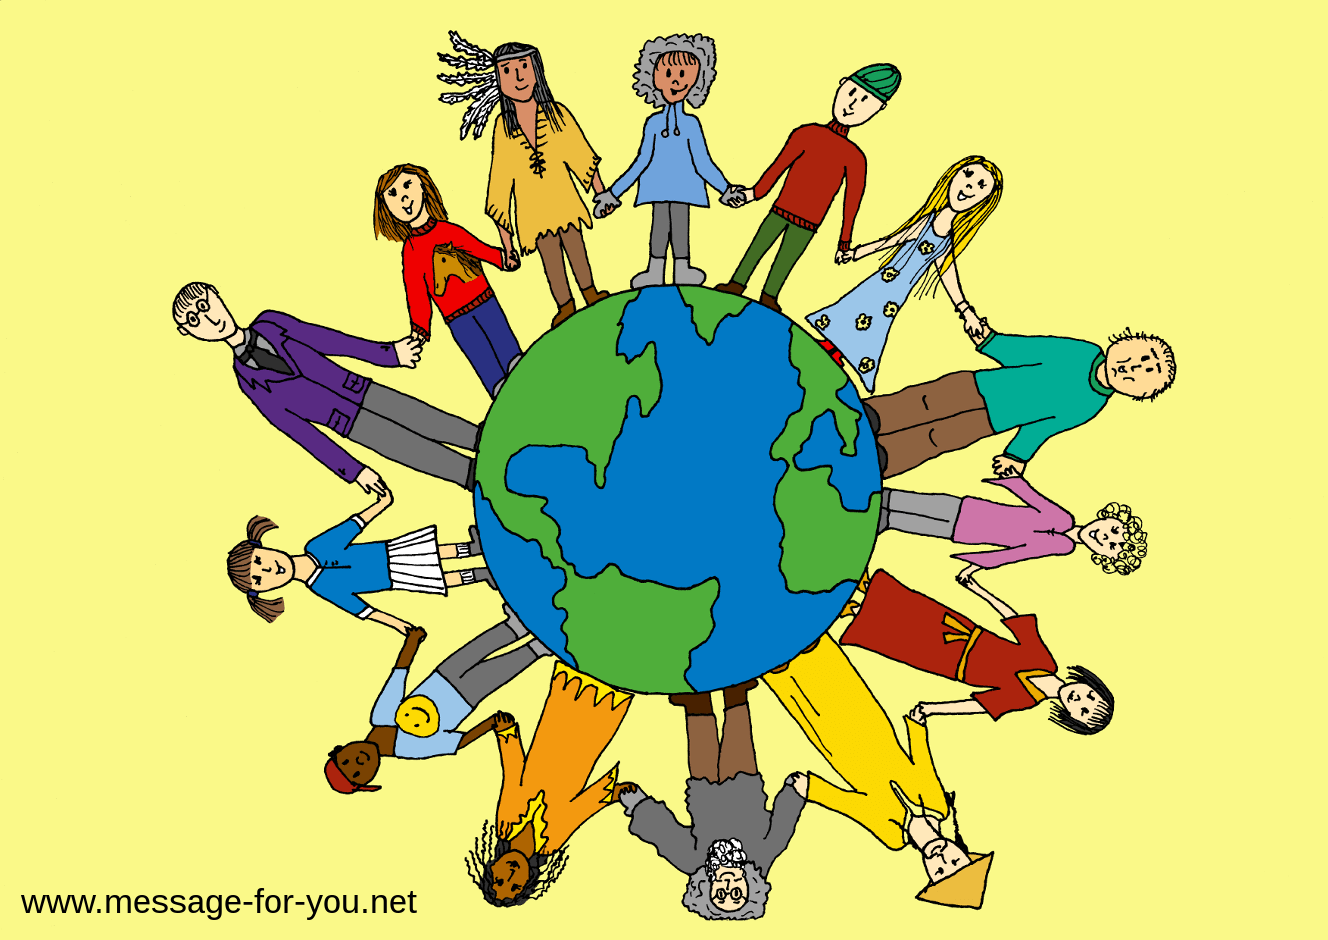 Coloured drawing of people holding hand around earth globe